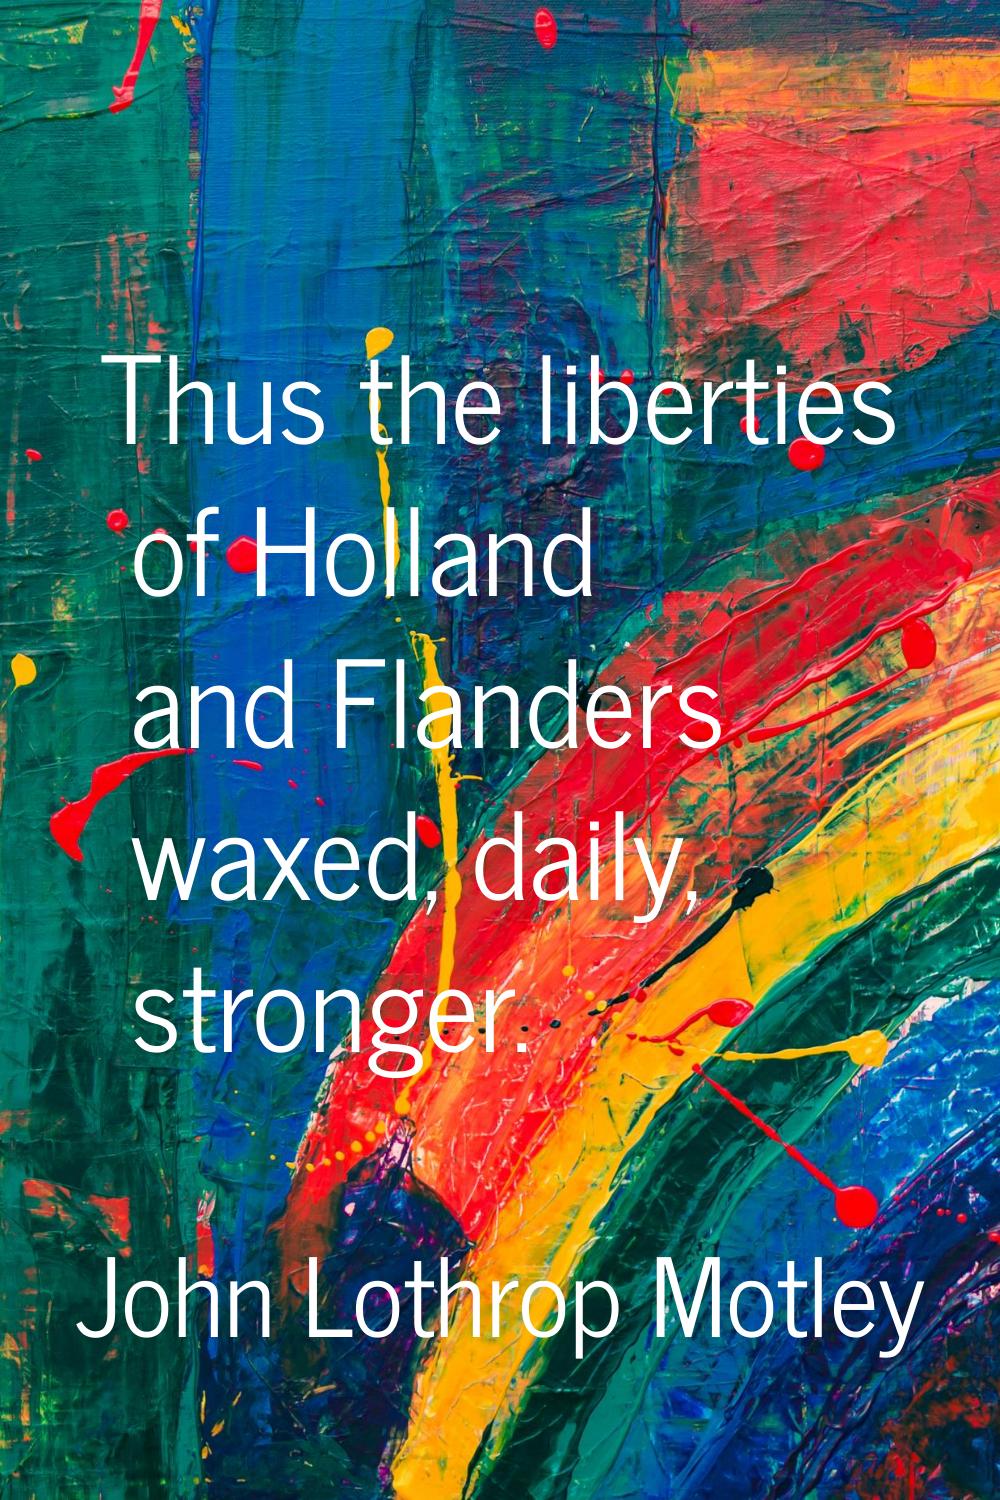 Thus the liberties of Holland and Flanders waxed, daily, stronger.